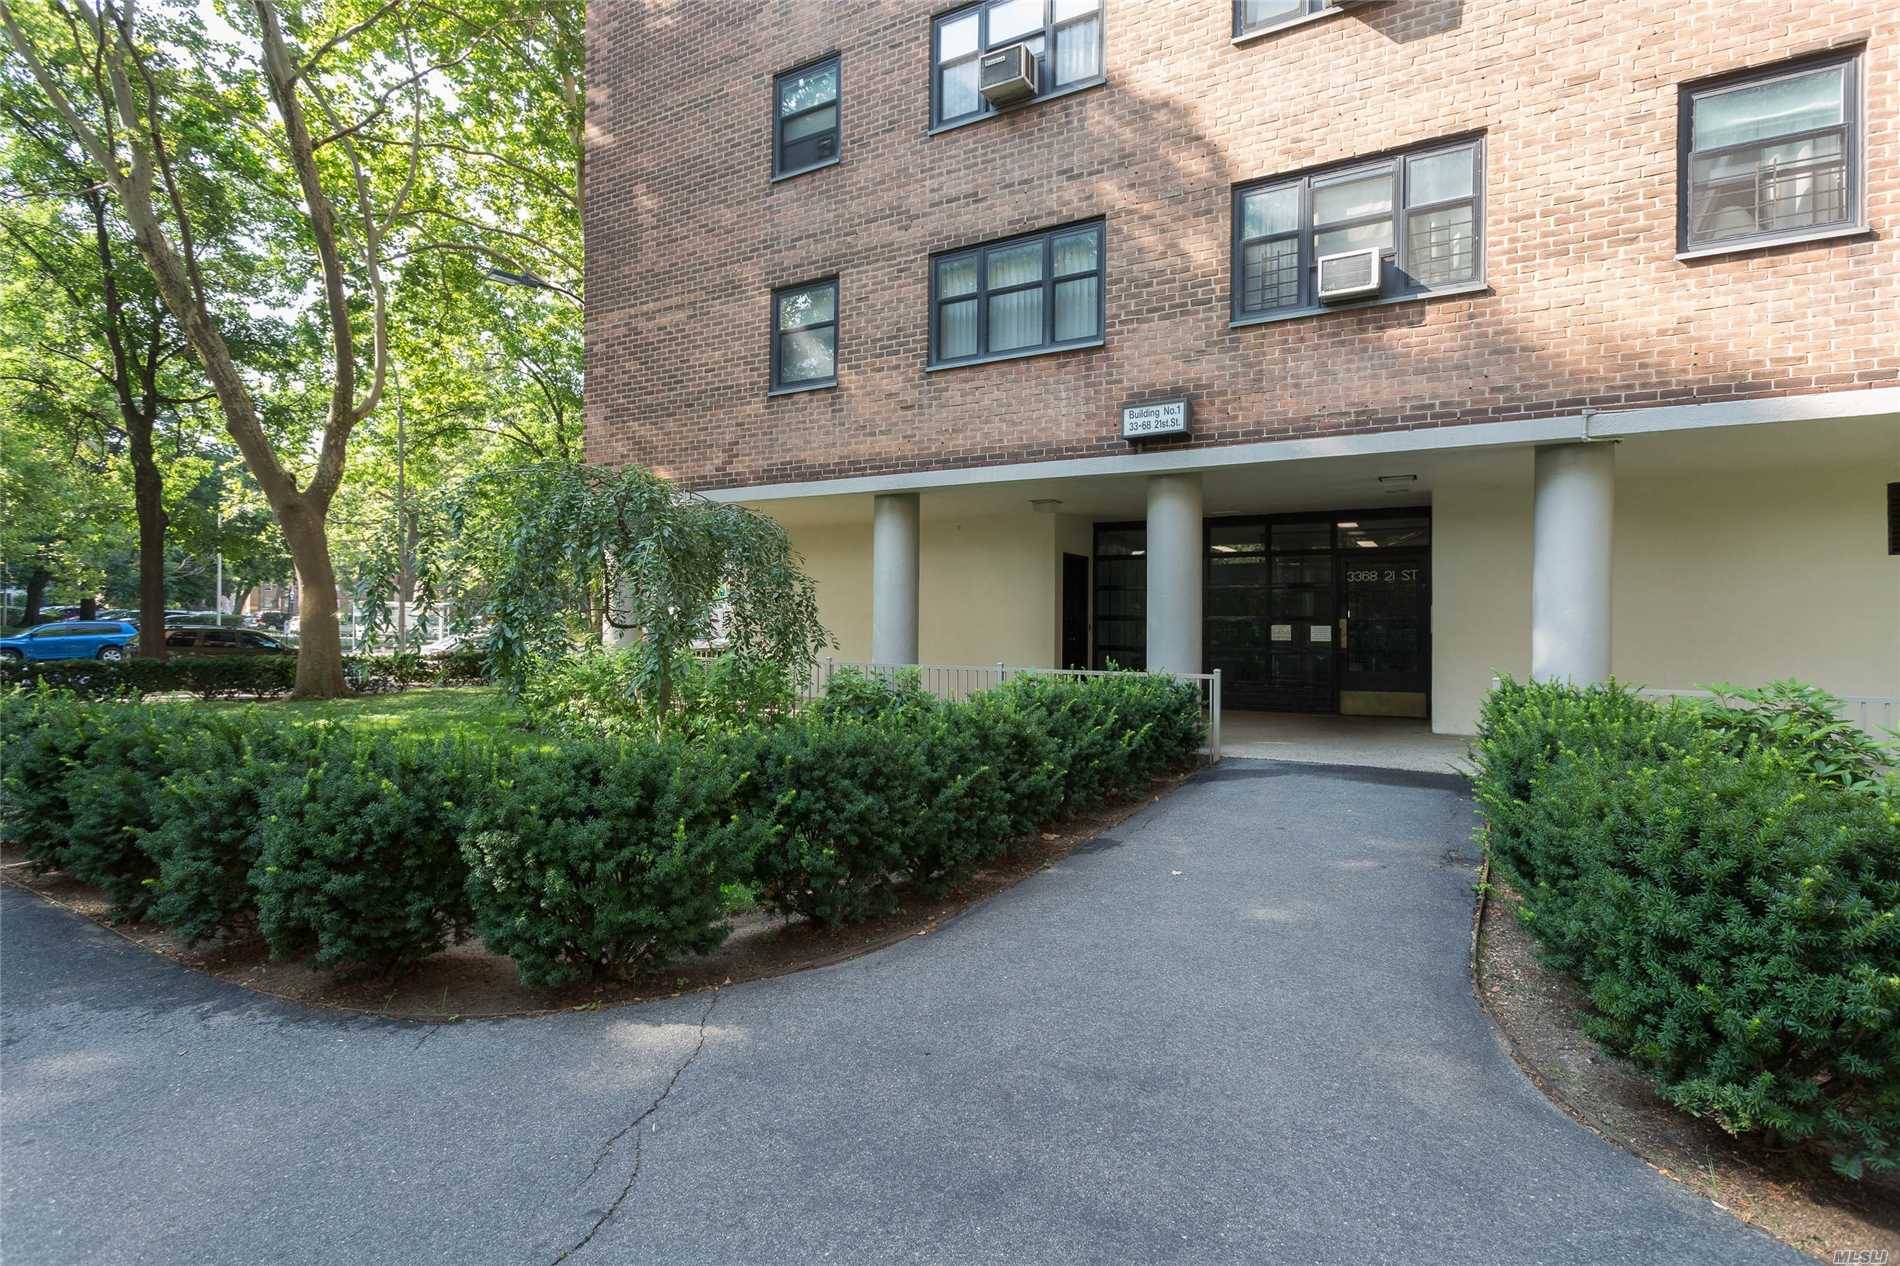 Beautifully Maintained Rarely Available 3 Bedroom Unit Gives You A Suburban Lifestyle In Lic!